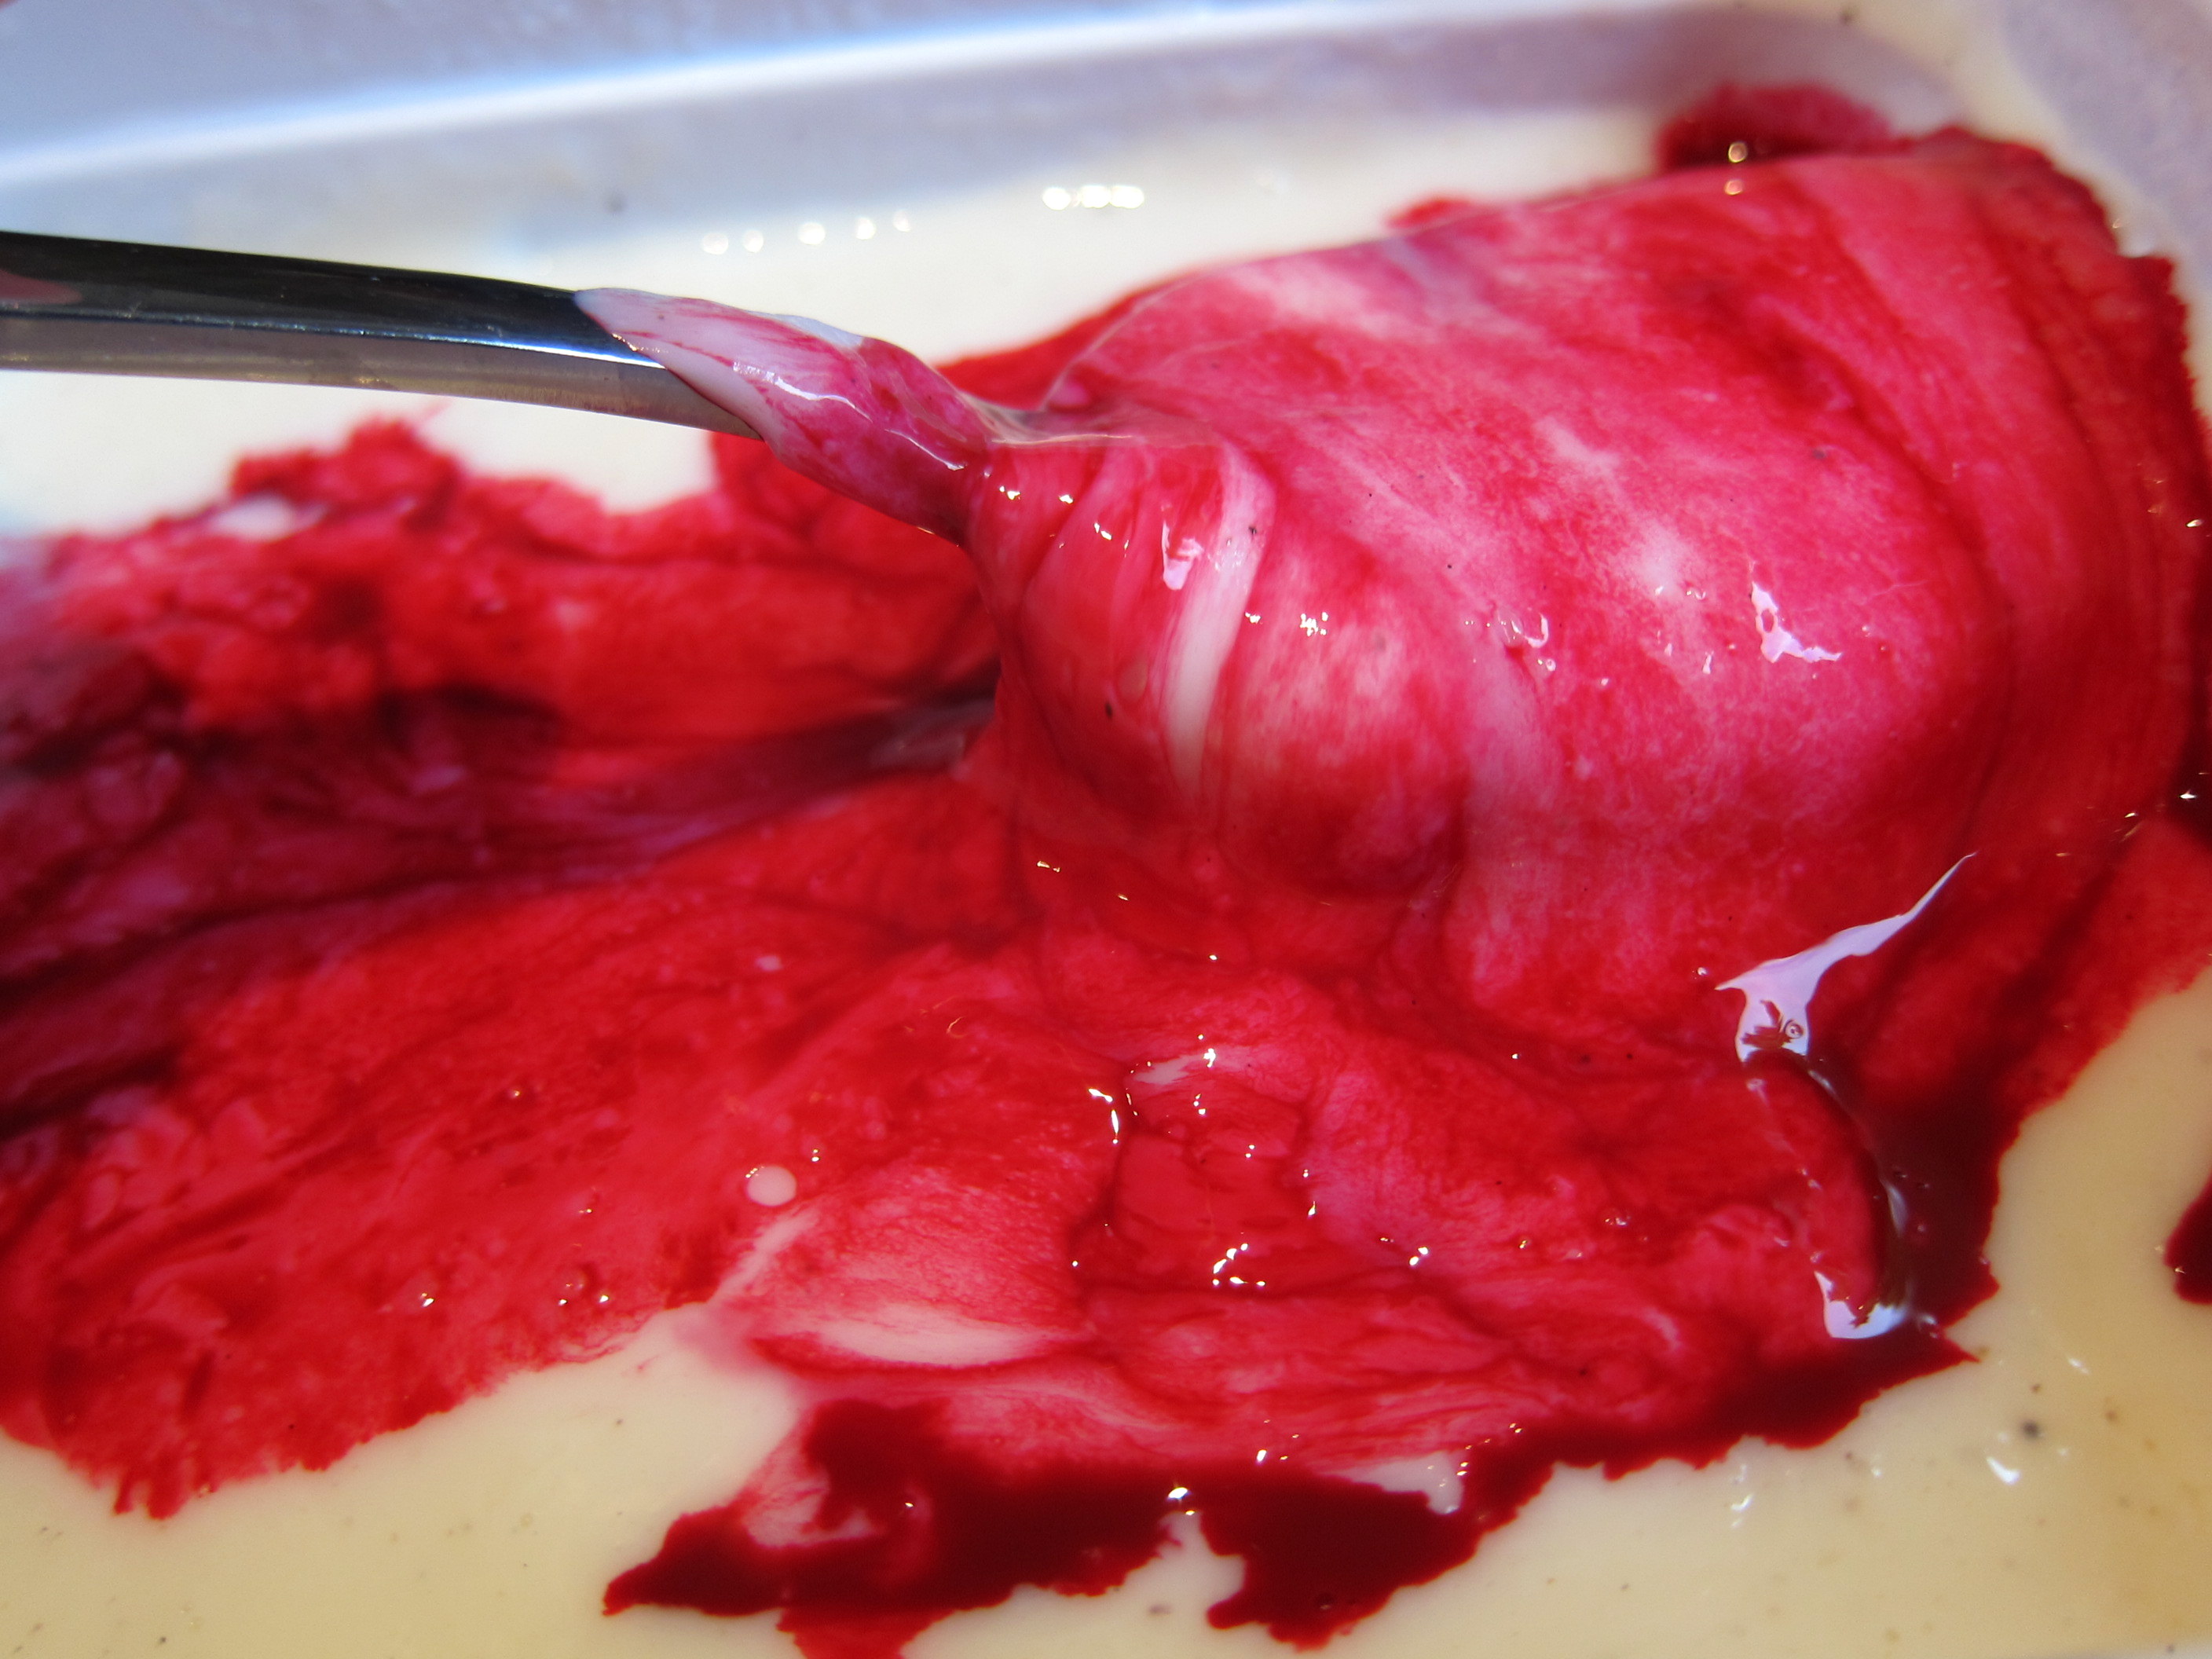 Yet another horrific ice cream, this time coloured disturbingly red 